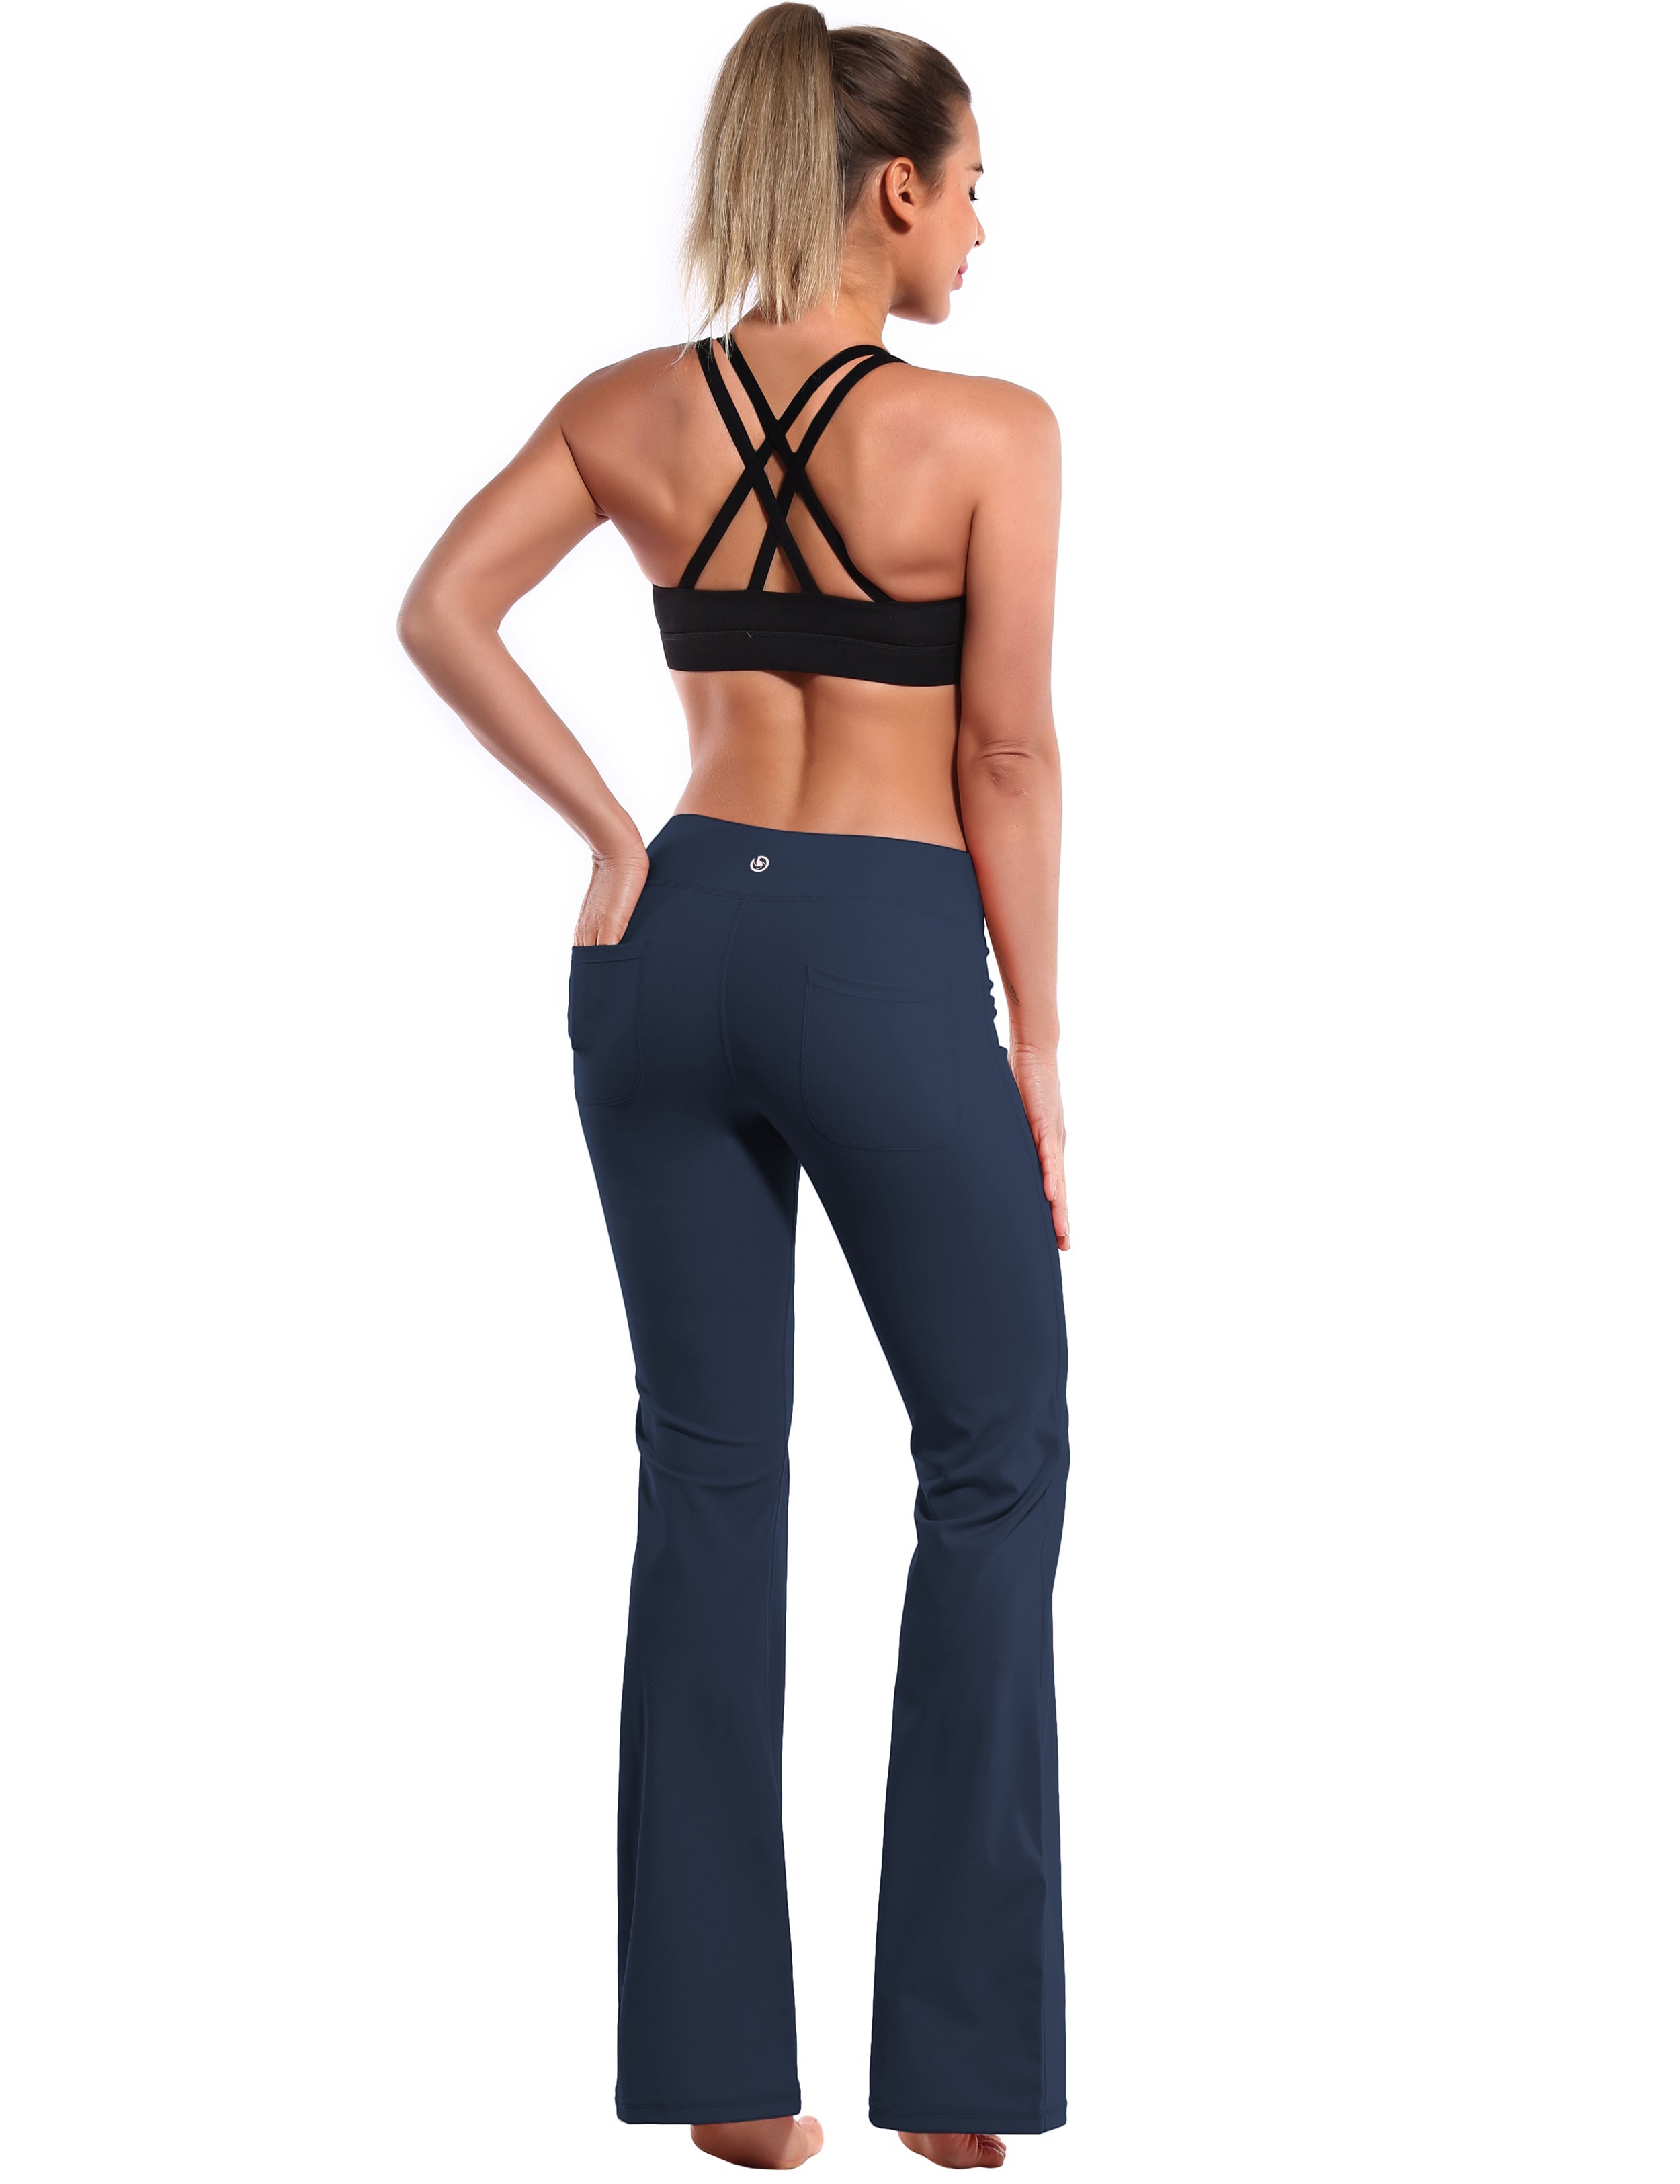 4 Pockets Bootcut Leggings darknavy 75%Nylon/25%Spandex Fabric doesn't attract lint easily 4-way stretch No see-through Moisture-wicking Inner pocket Four lengths